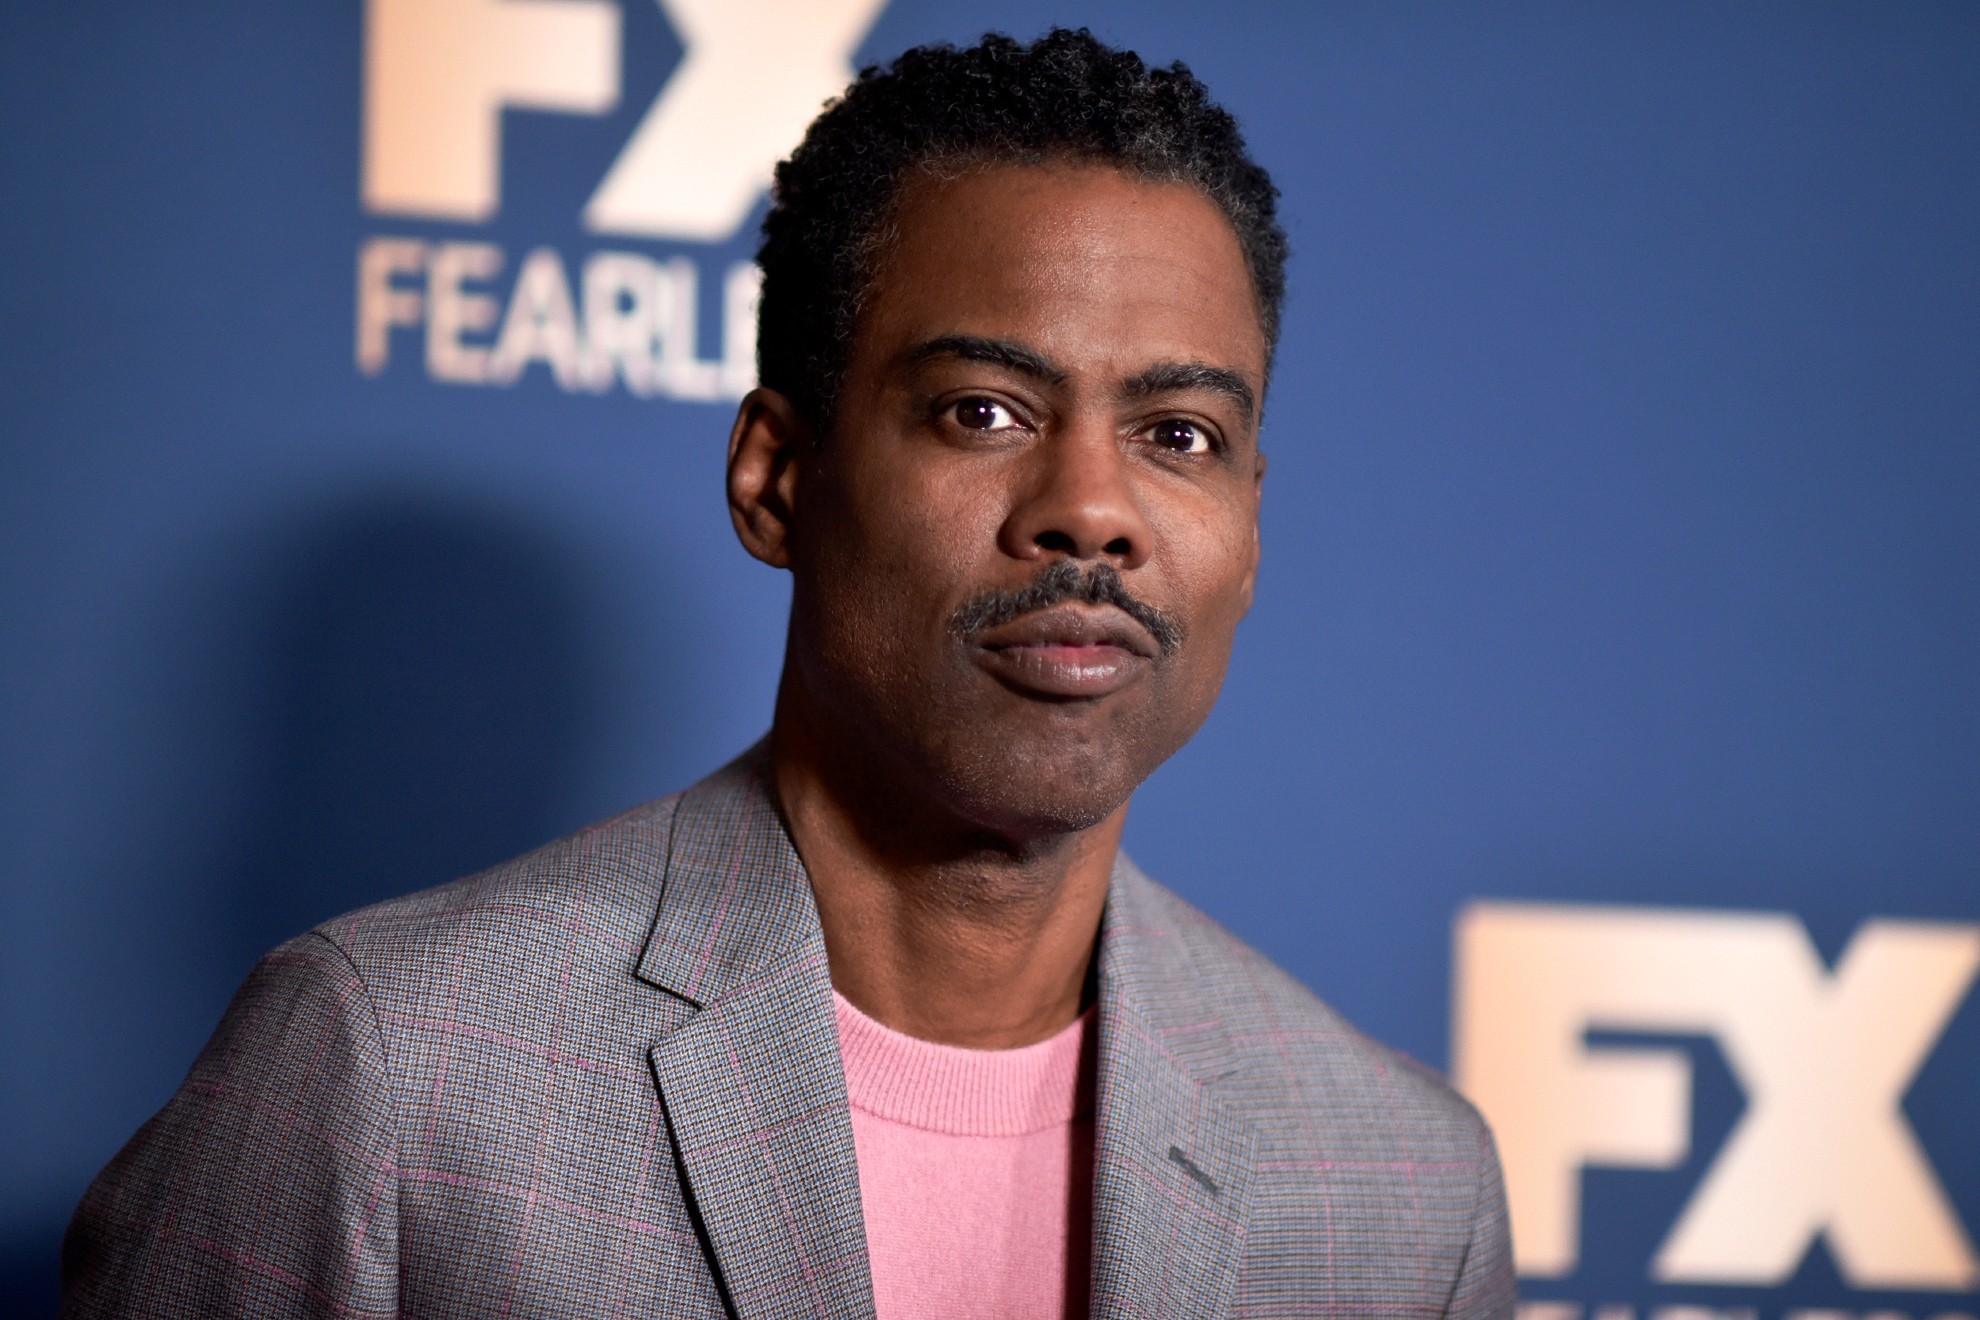 Chris Rock appears at the Television Critics Association Winter press tour in Pasadena.